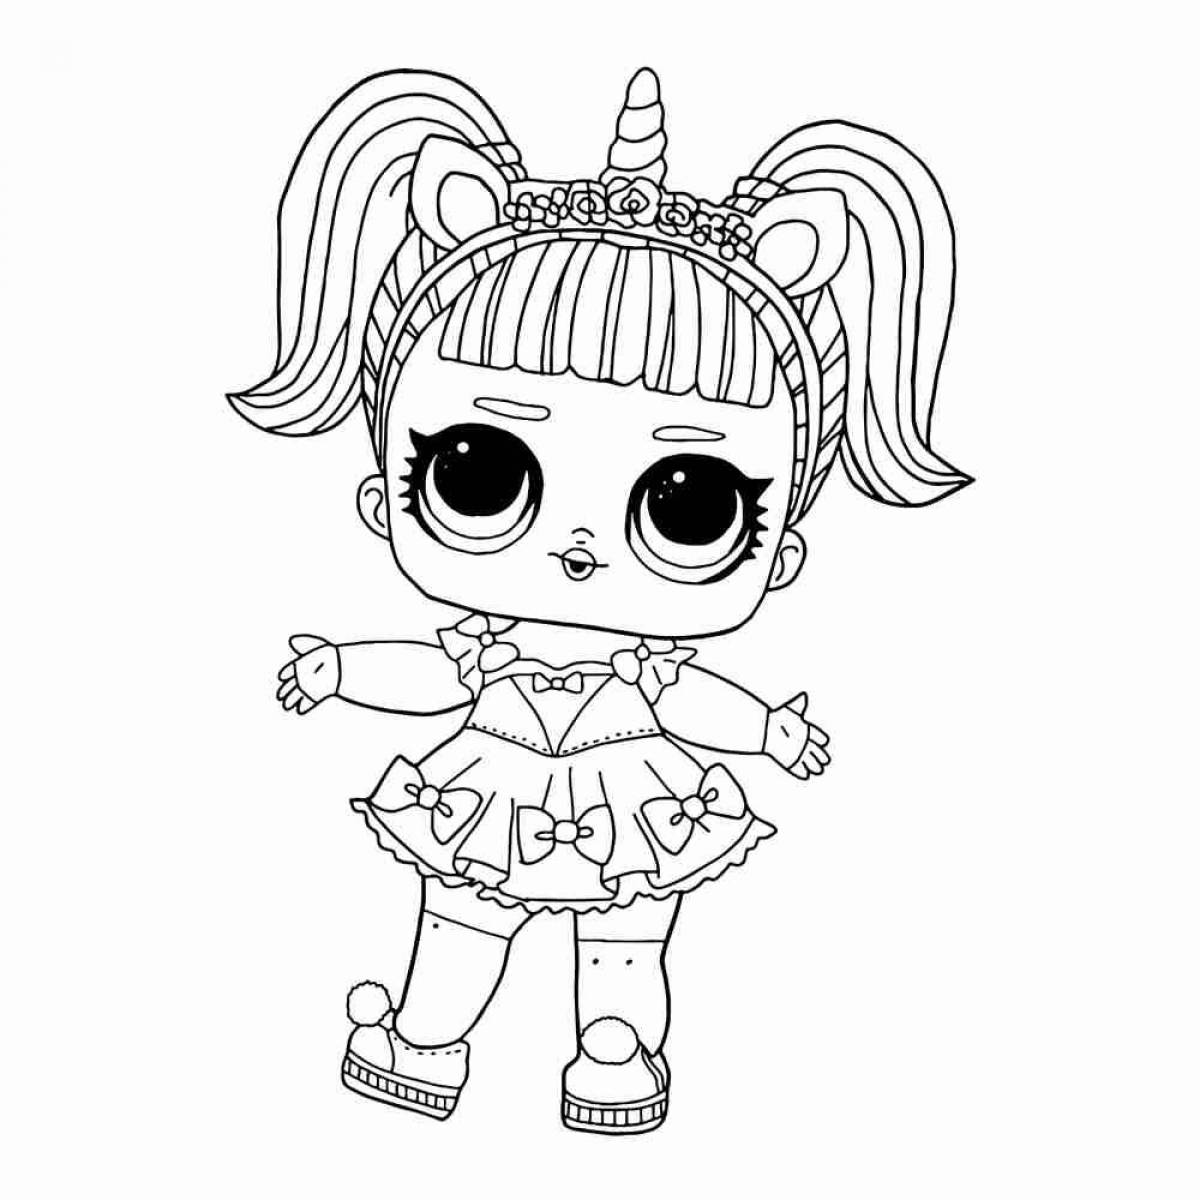 Lola doll coloring pages for kids